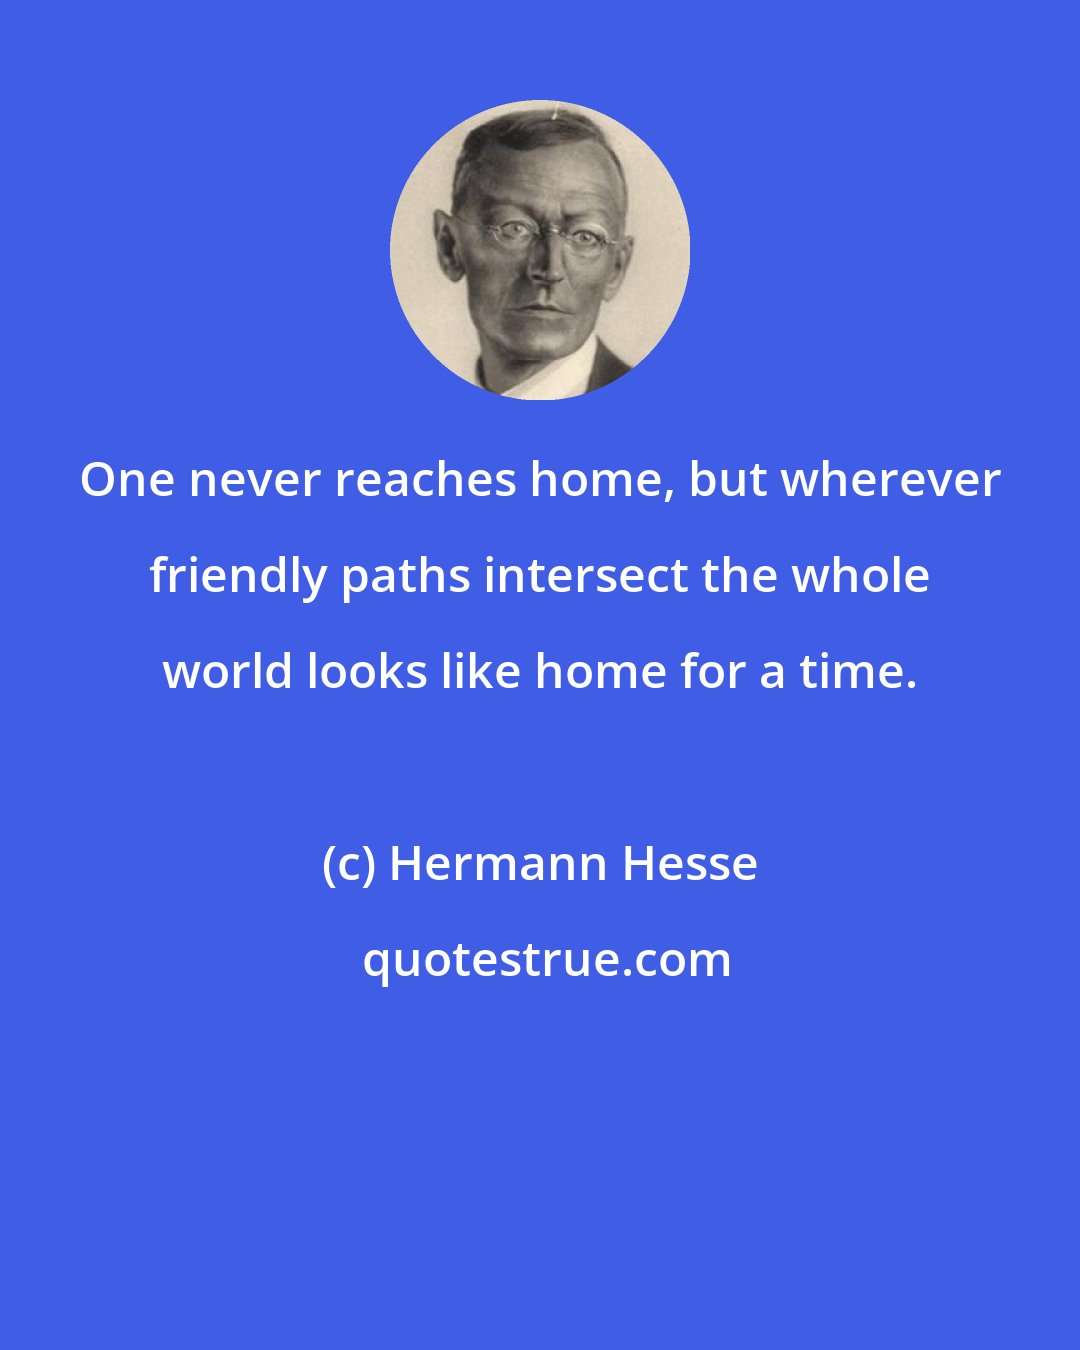 Hermann Hesse: One never reaches home, but wherever friendly paths intersect the whole world looks like home for a time.